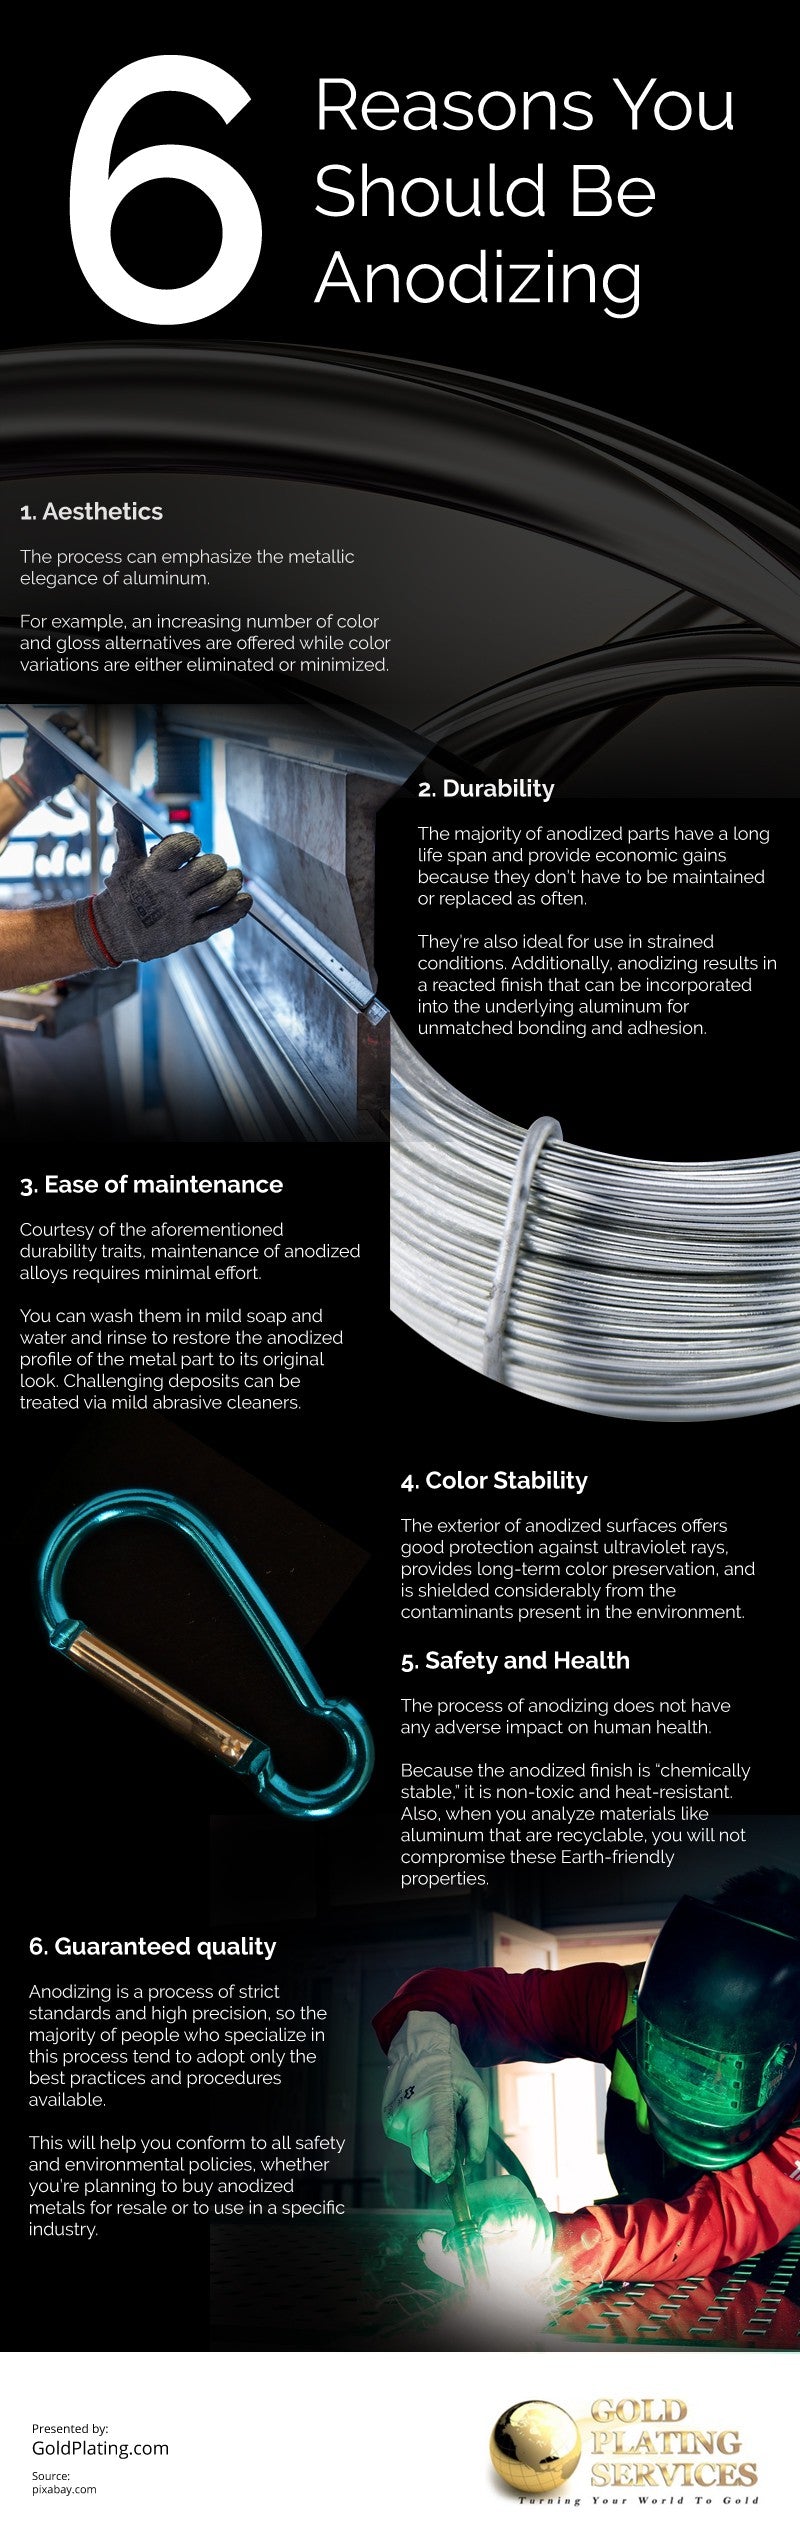 6 Reasons You Should be Anodizing [infographic]